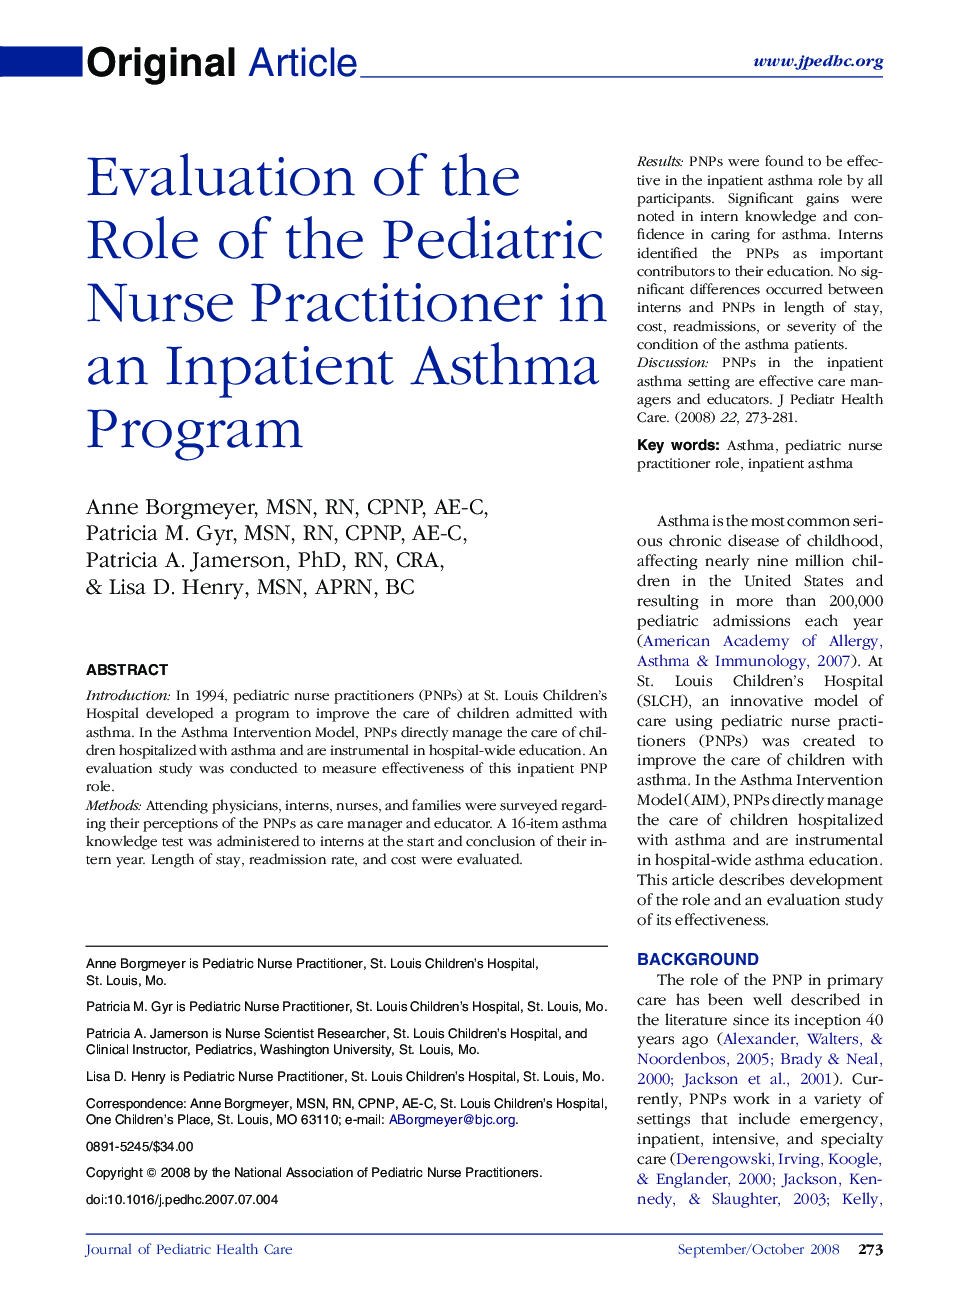 Evaluation of the Role of the Pediatric Nurse Practitioner in an Inpatient Asthma Program